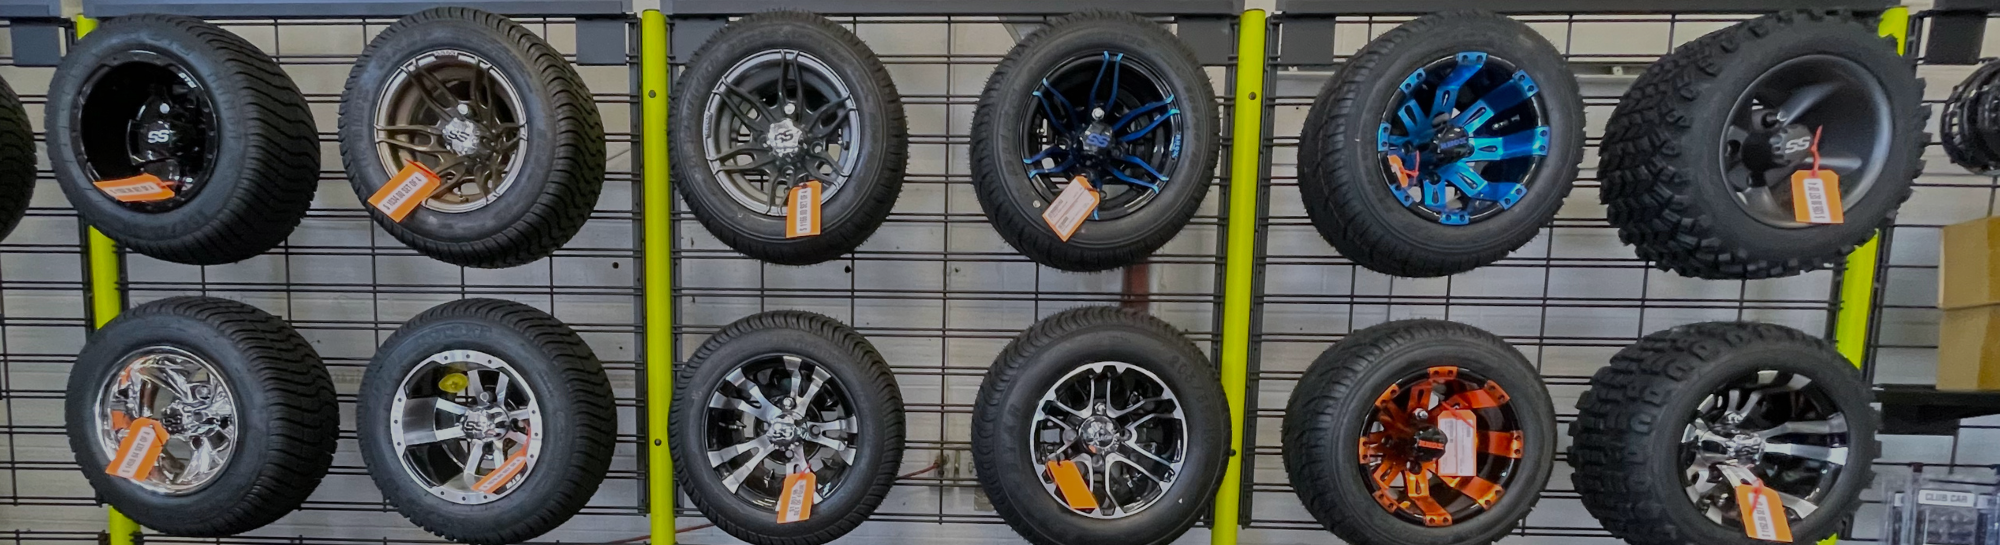 Golf cart wheel and tire sets displayed on a wall.